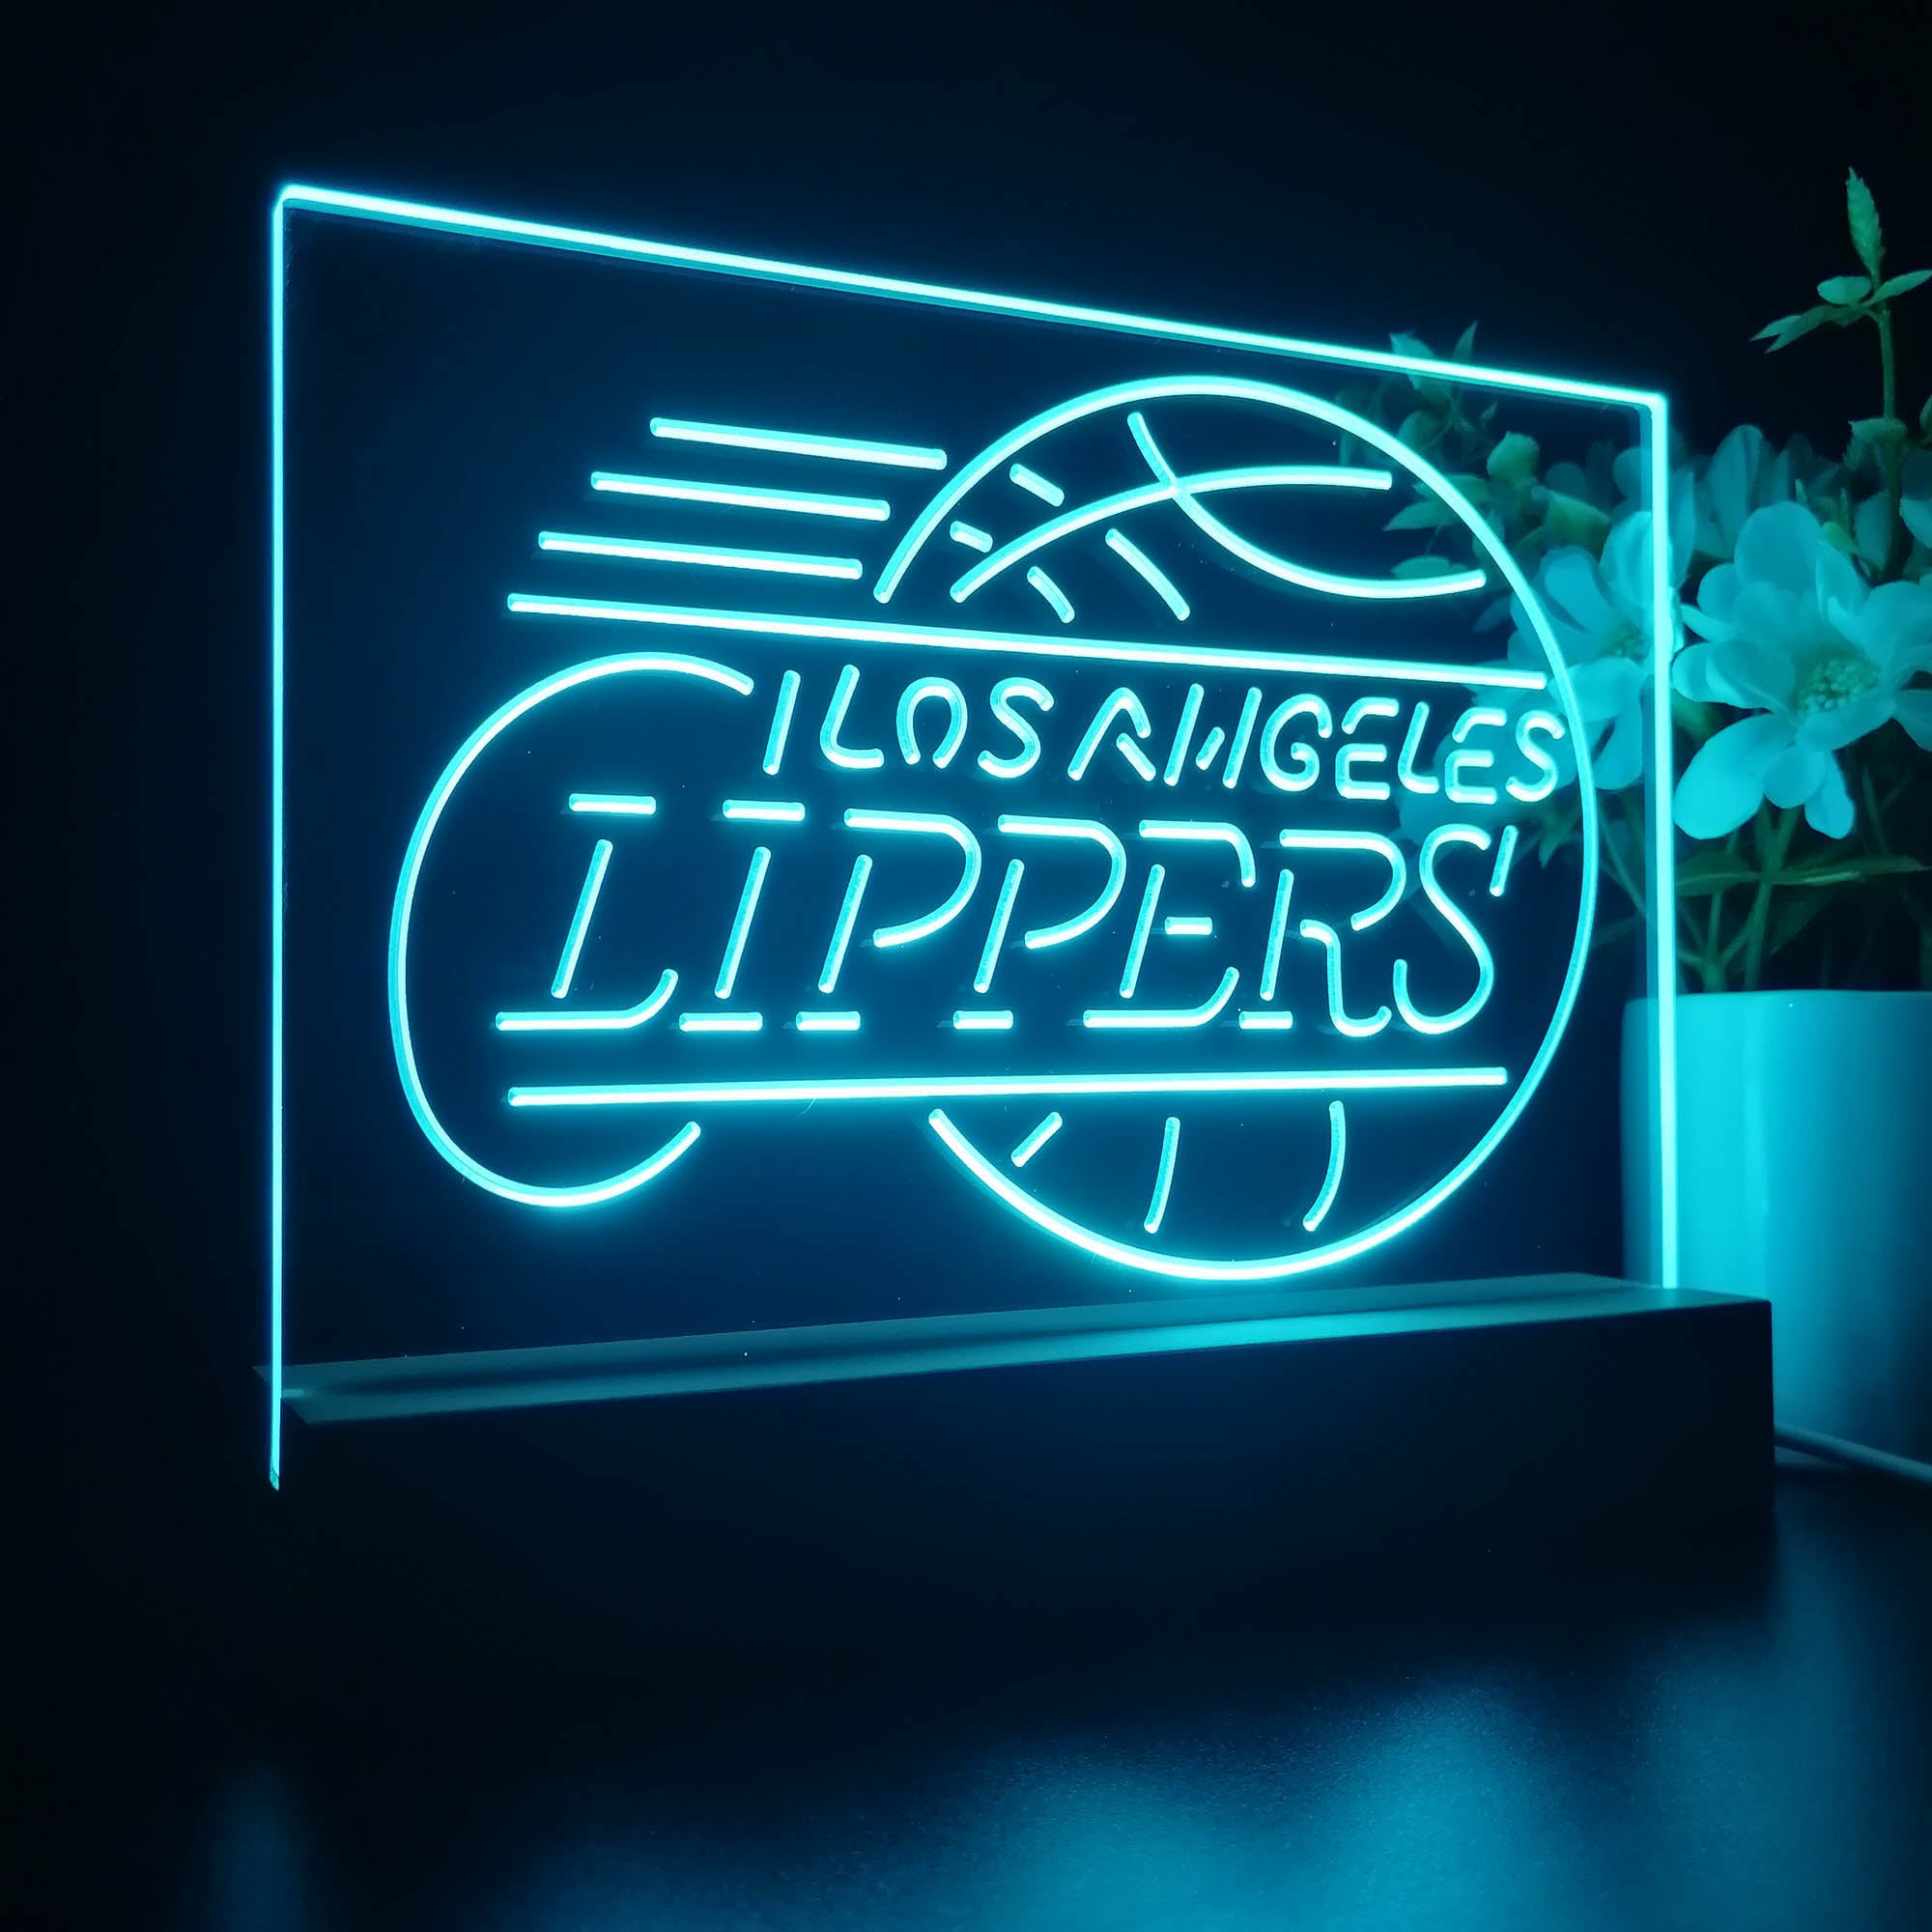 Los Angeles Clippers 3D LED Optical Illusion Sport Team Night Light